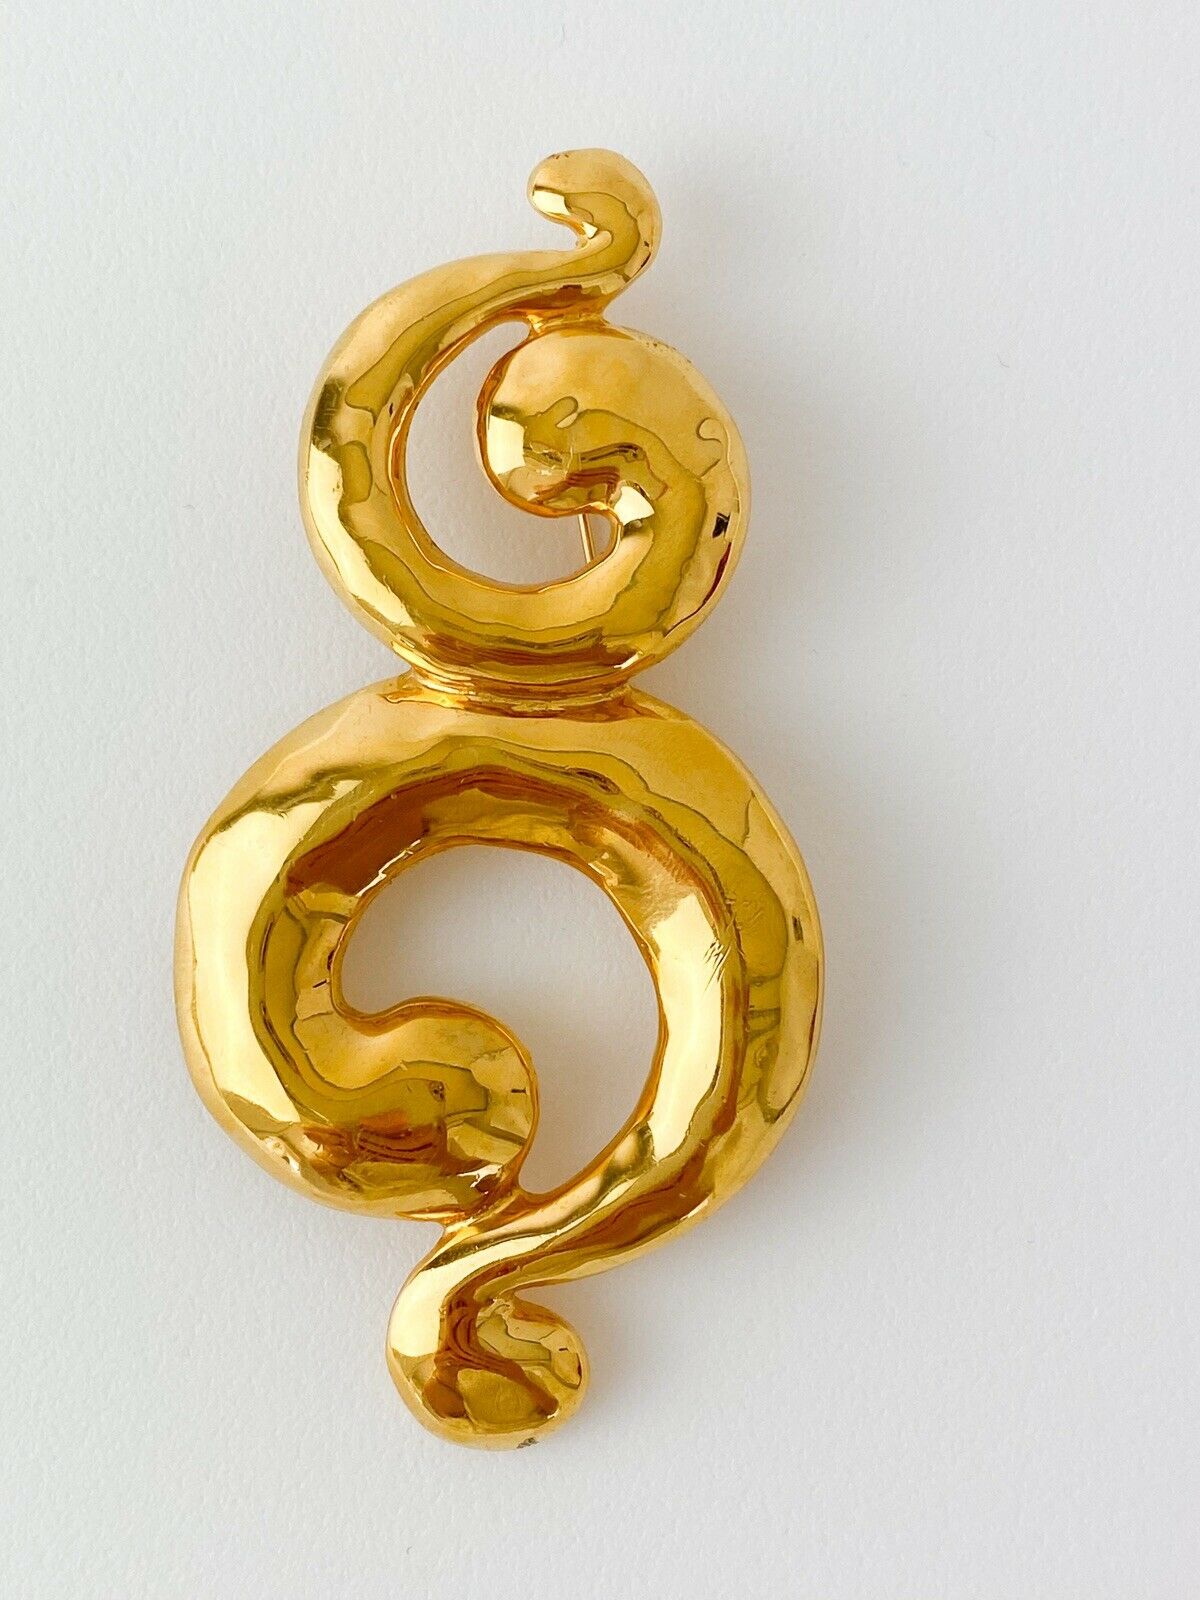 YSL Yves Saint Laurent Vintage Gold Tone Coiled Spiral Brooch Pin